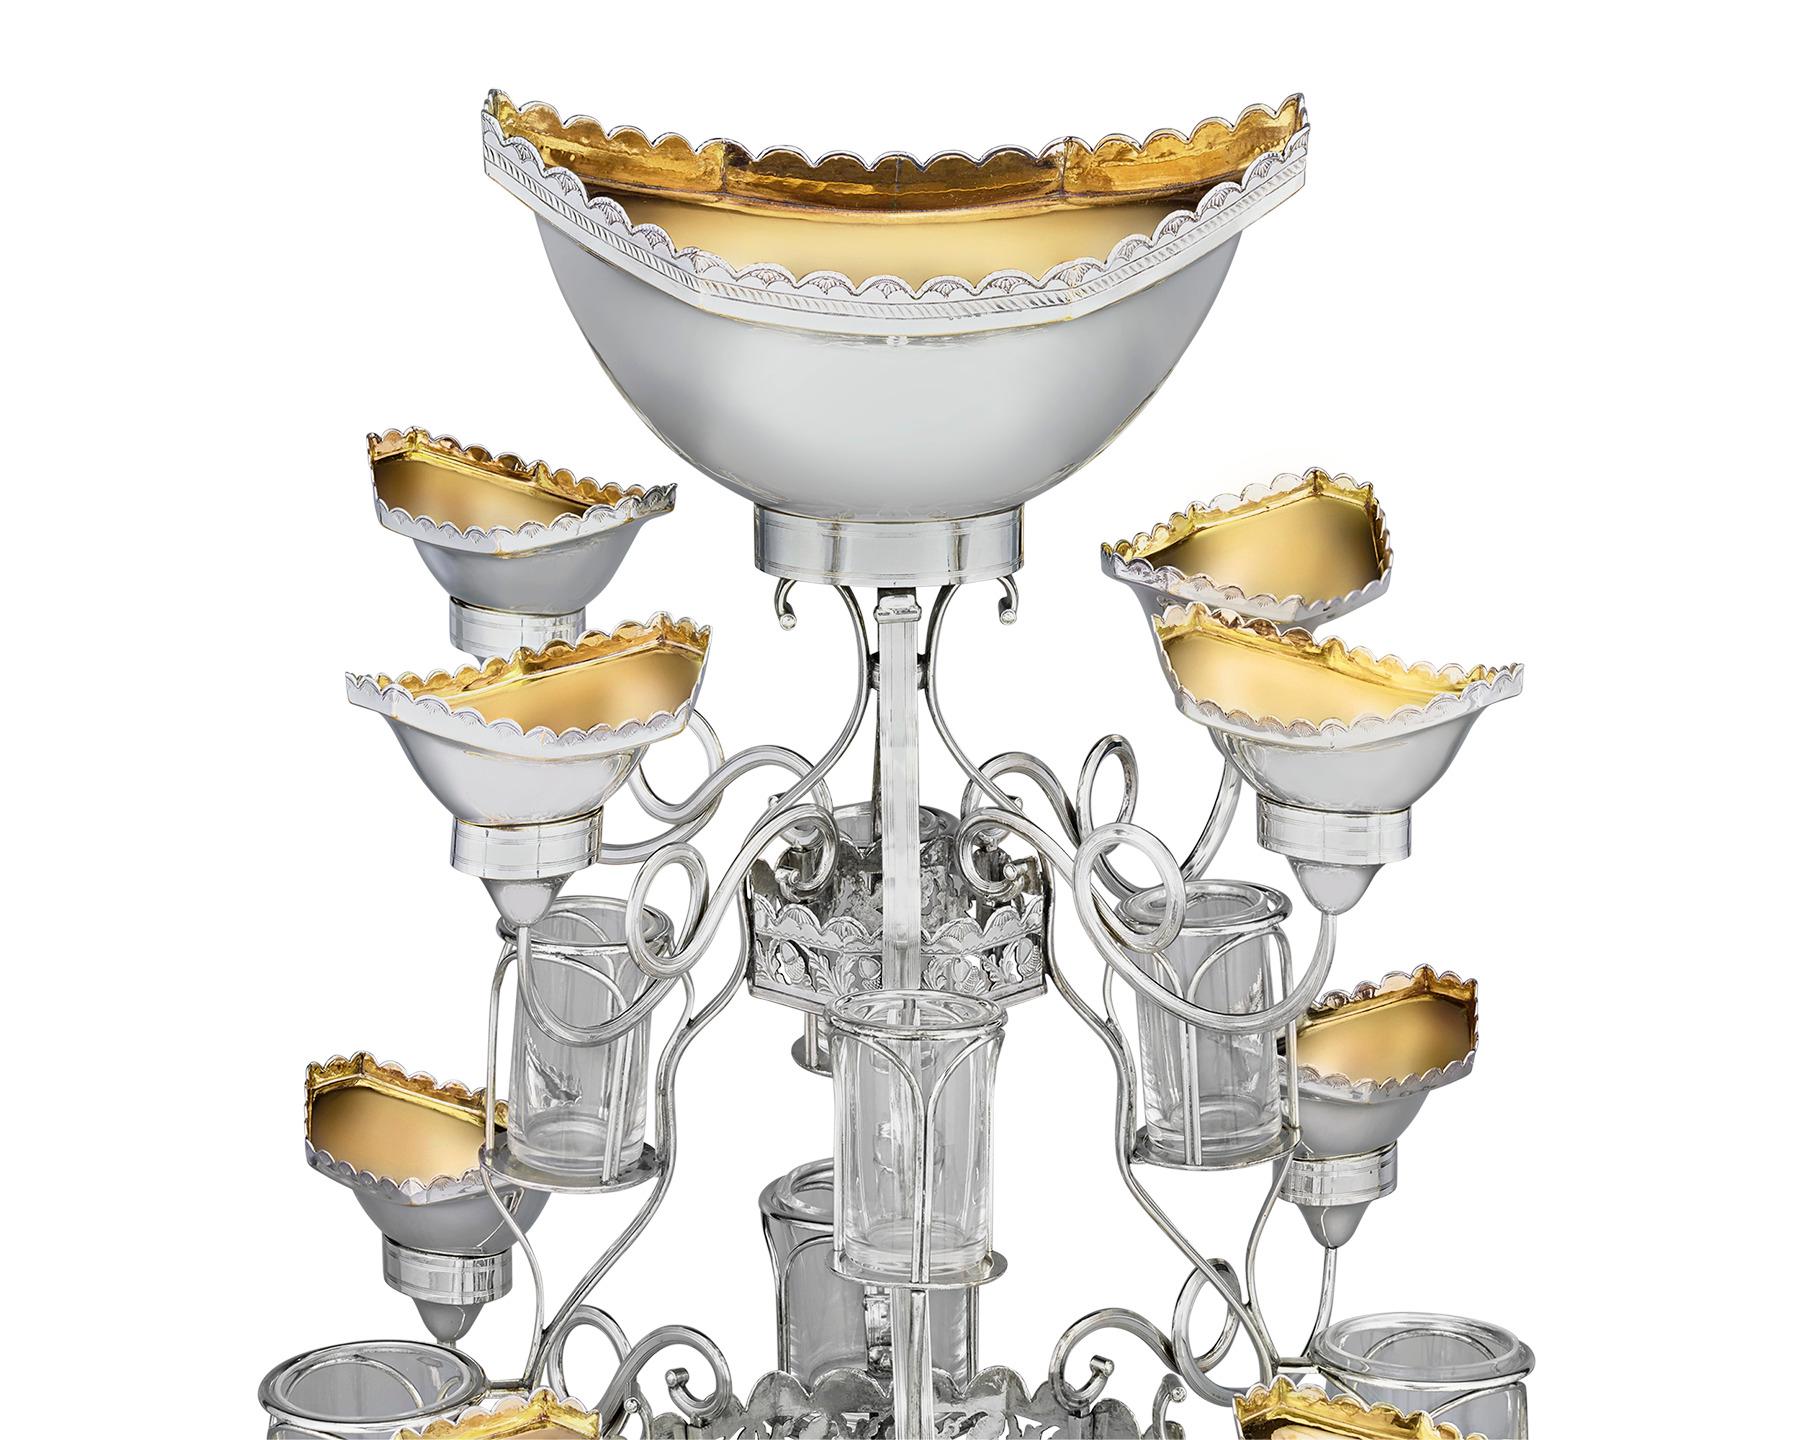 This Old Sheffield silver plate epergne showcases a refined Georgian-period scalloped motif embellished with acorns and foliage. It rotates with ease around its base for convenient access to all eight of its small dishes, cruet bottle holders and